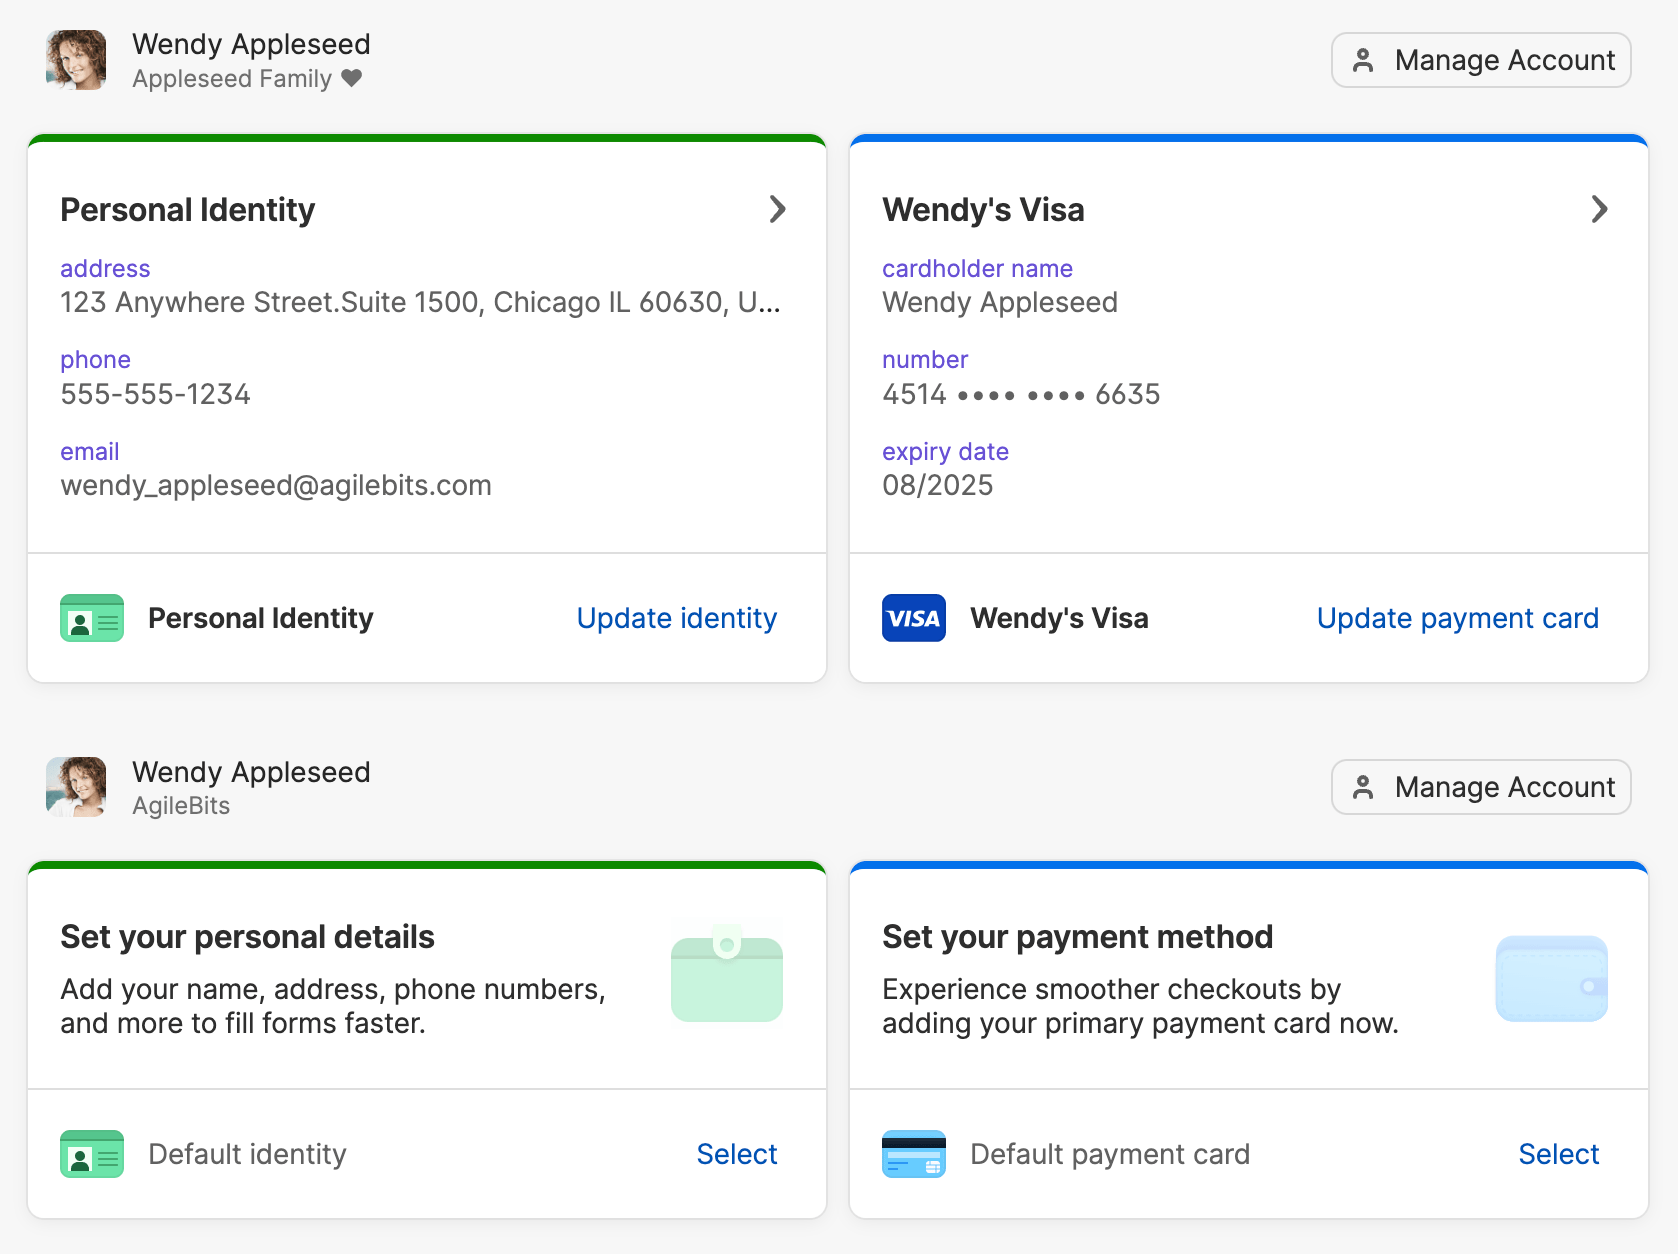 The Profile option selected in the sidebar with two 1Password accounts displayed. One account has a default identity and payment card selected.